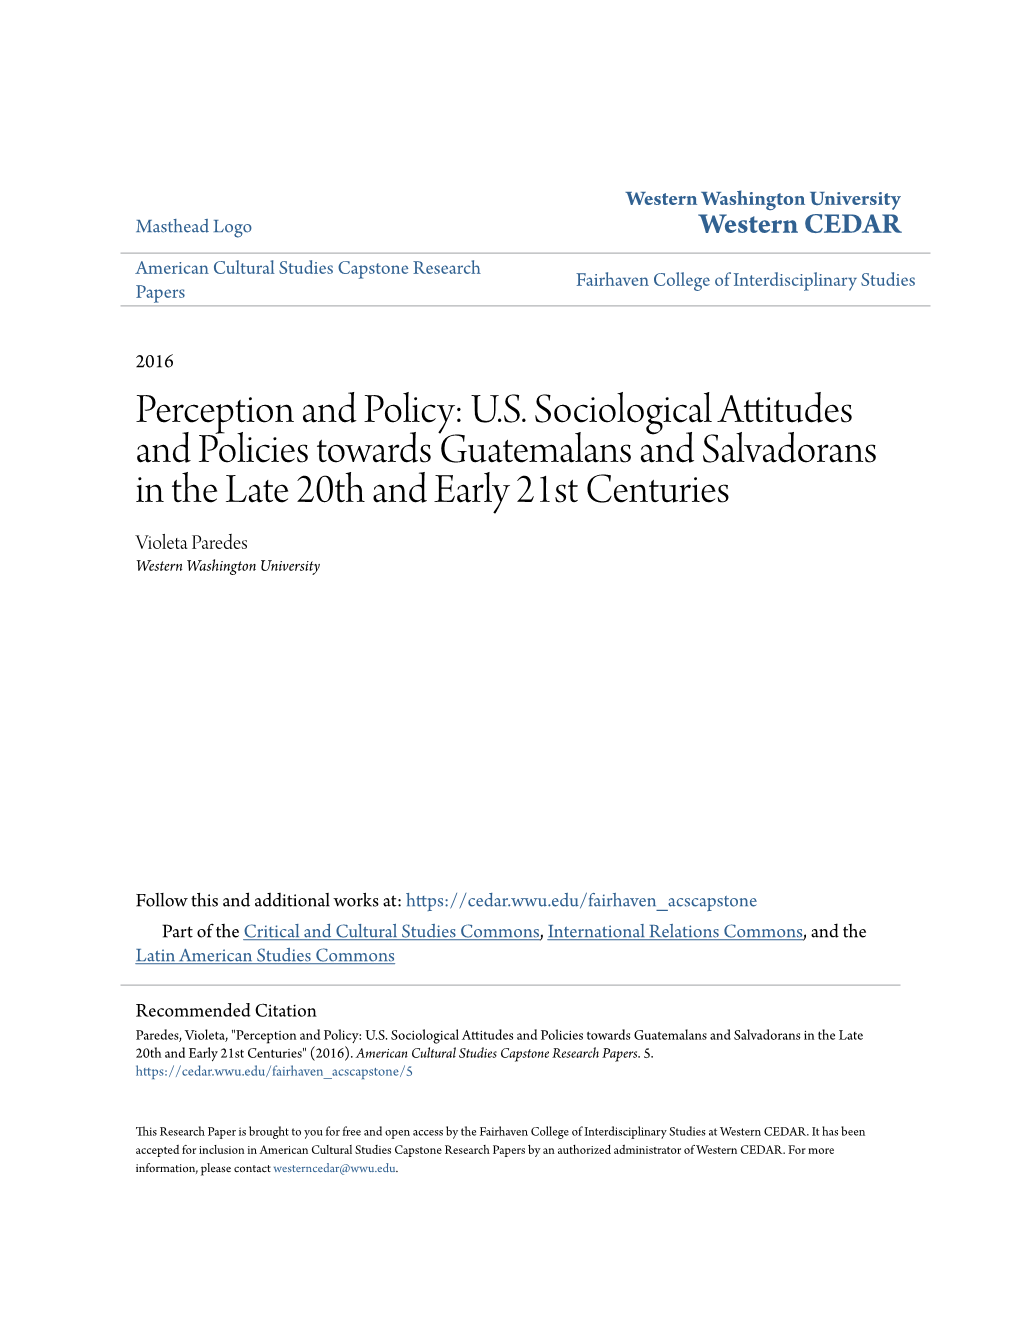 US Sociological Attitudes and Policies Towards Guatemalans And